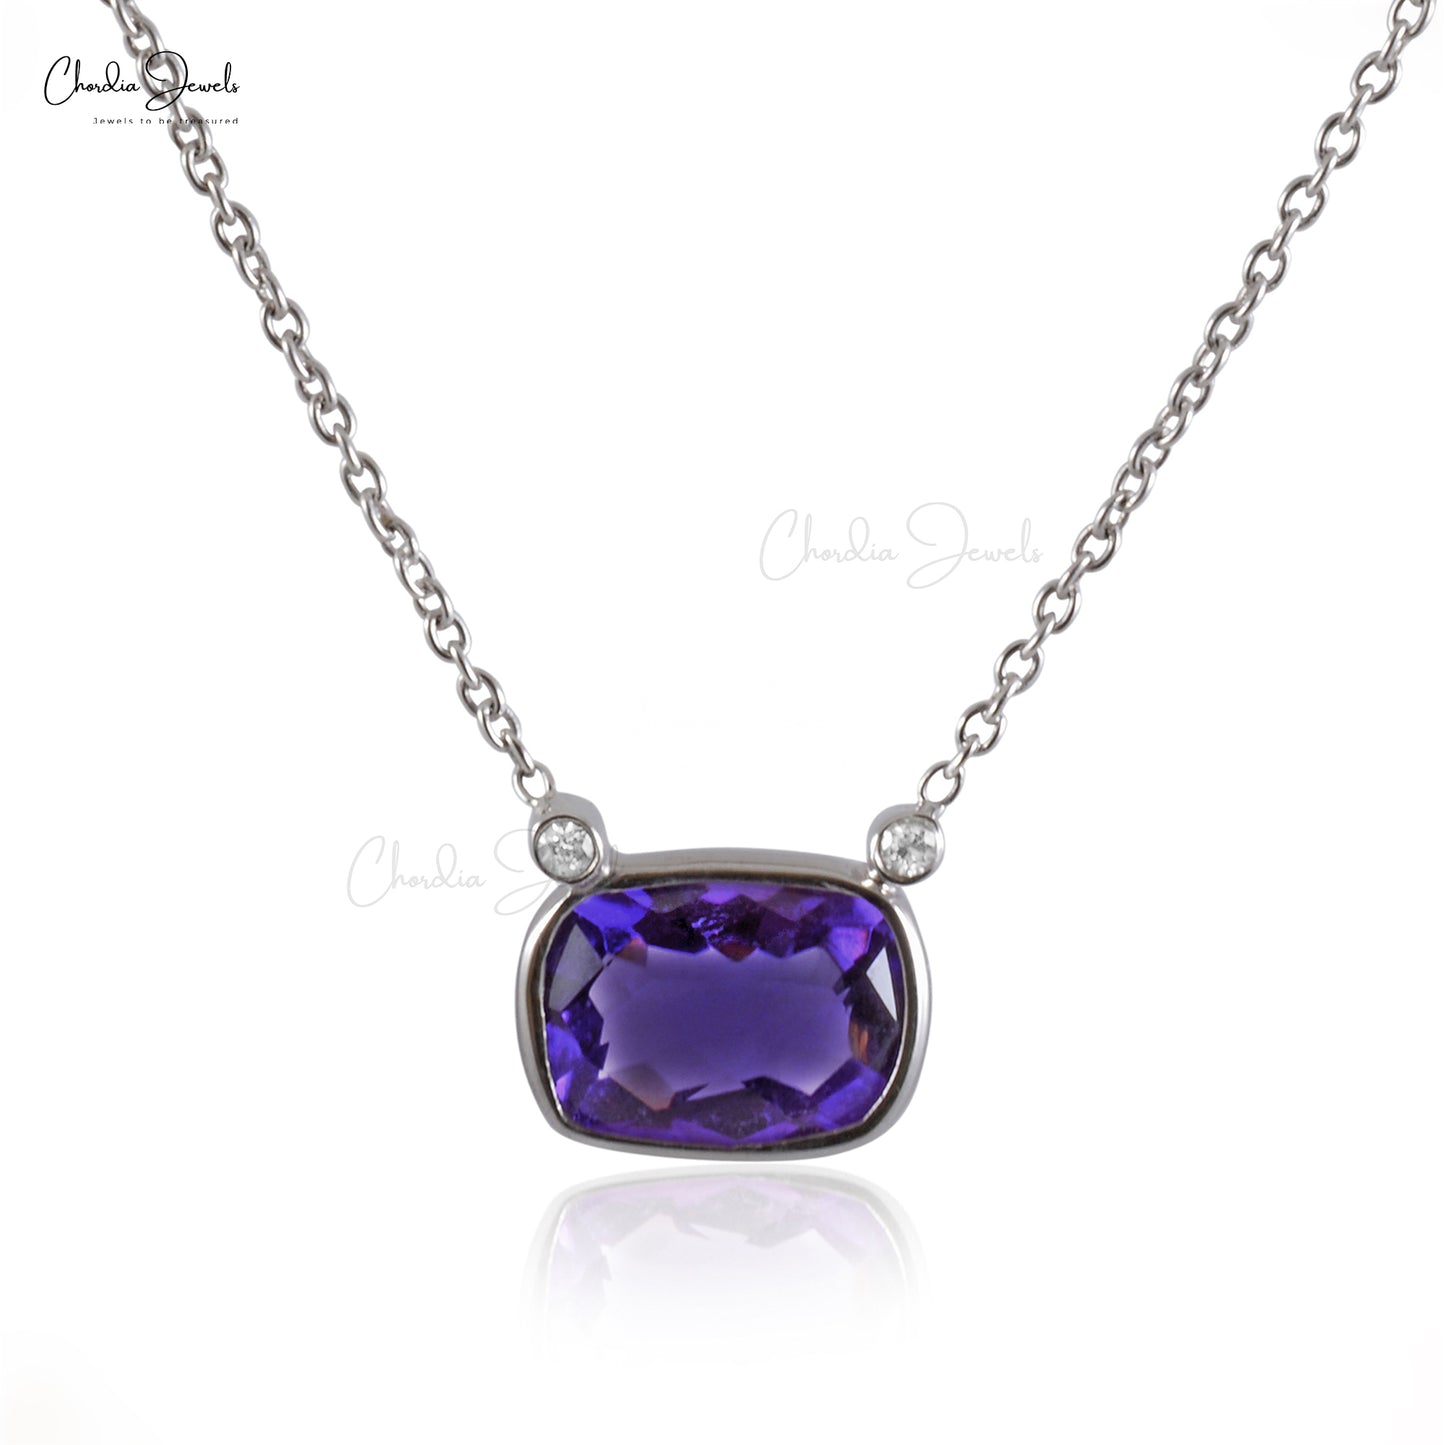 Natural Amethyst and Diamond Necklace in 14k Solid White Gold 8x6mm Recta Cushion Cut Gemstone Bezel Necklace